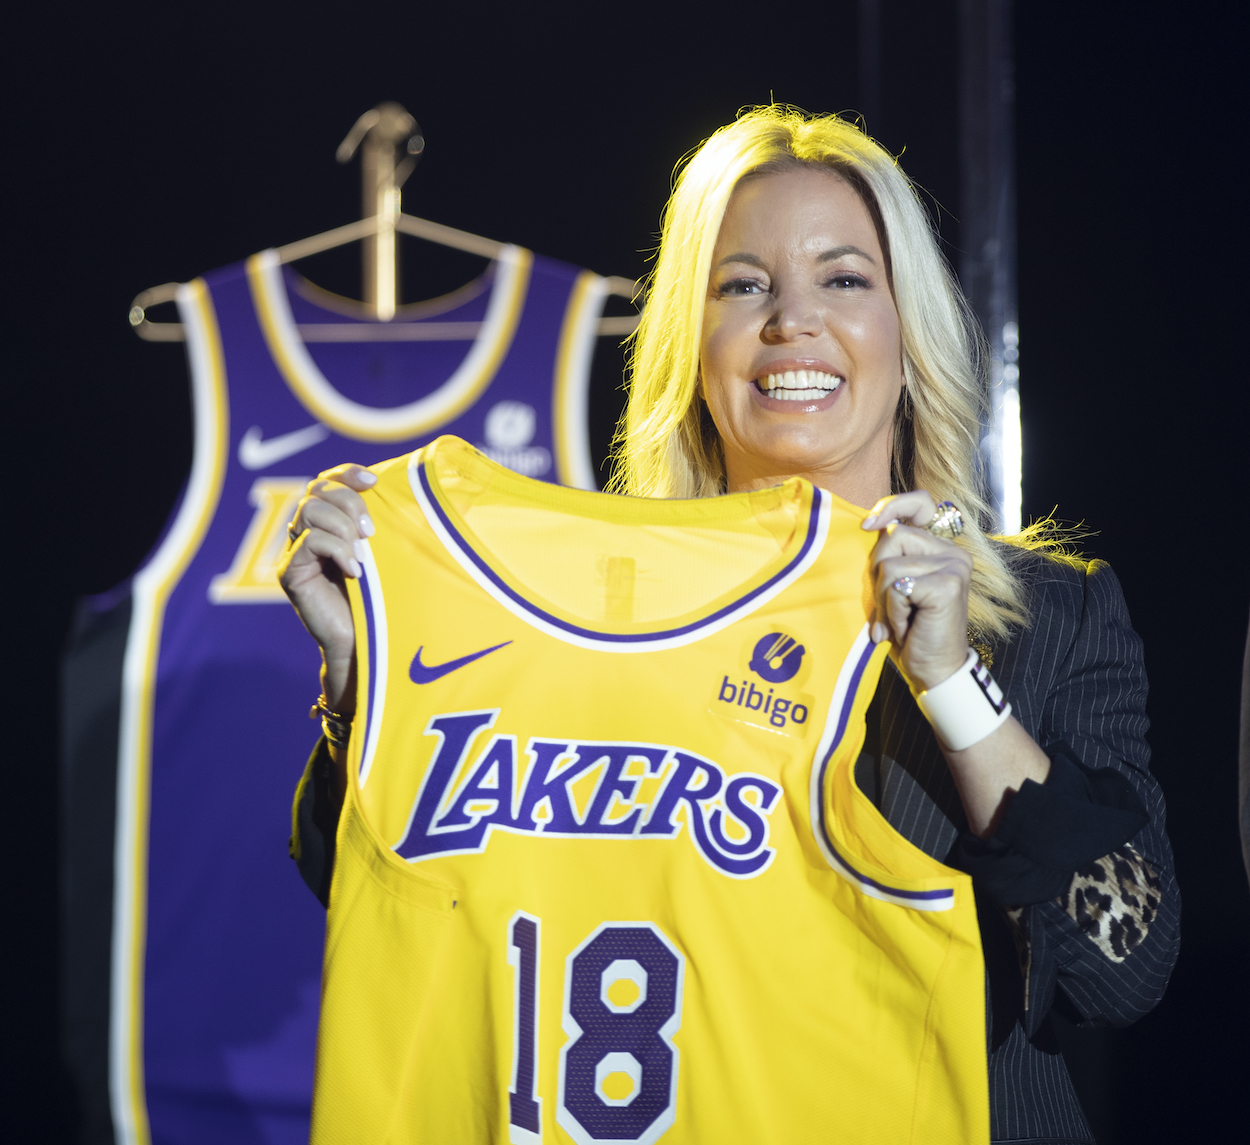 Lakers announce new jersey logo patch sponsor deal with Bibigo